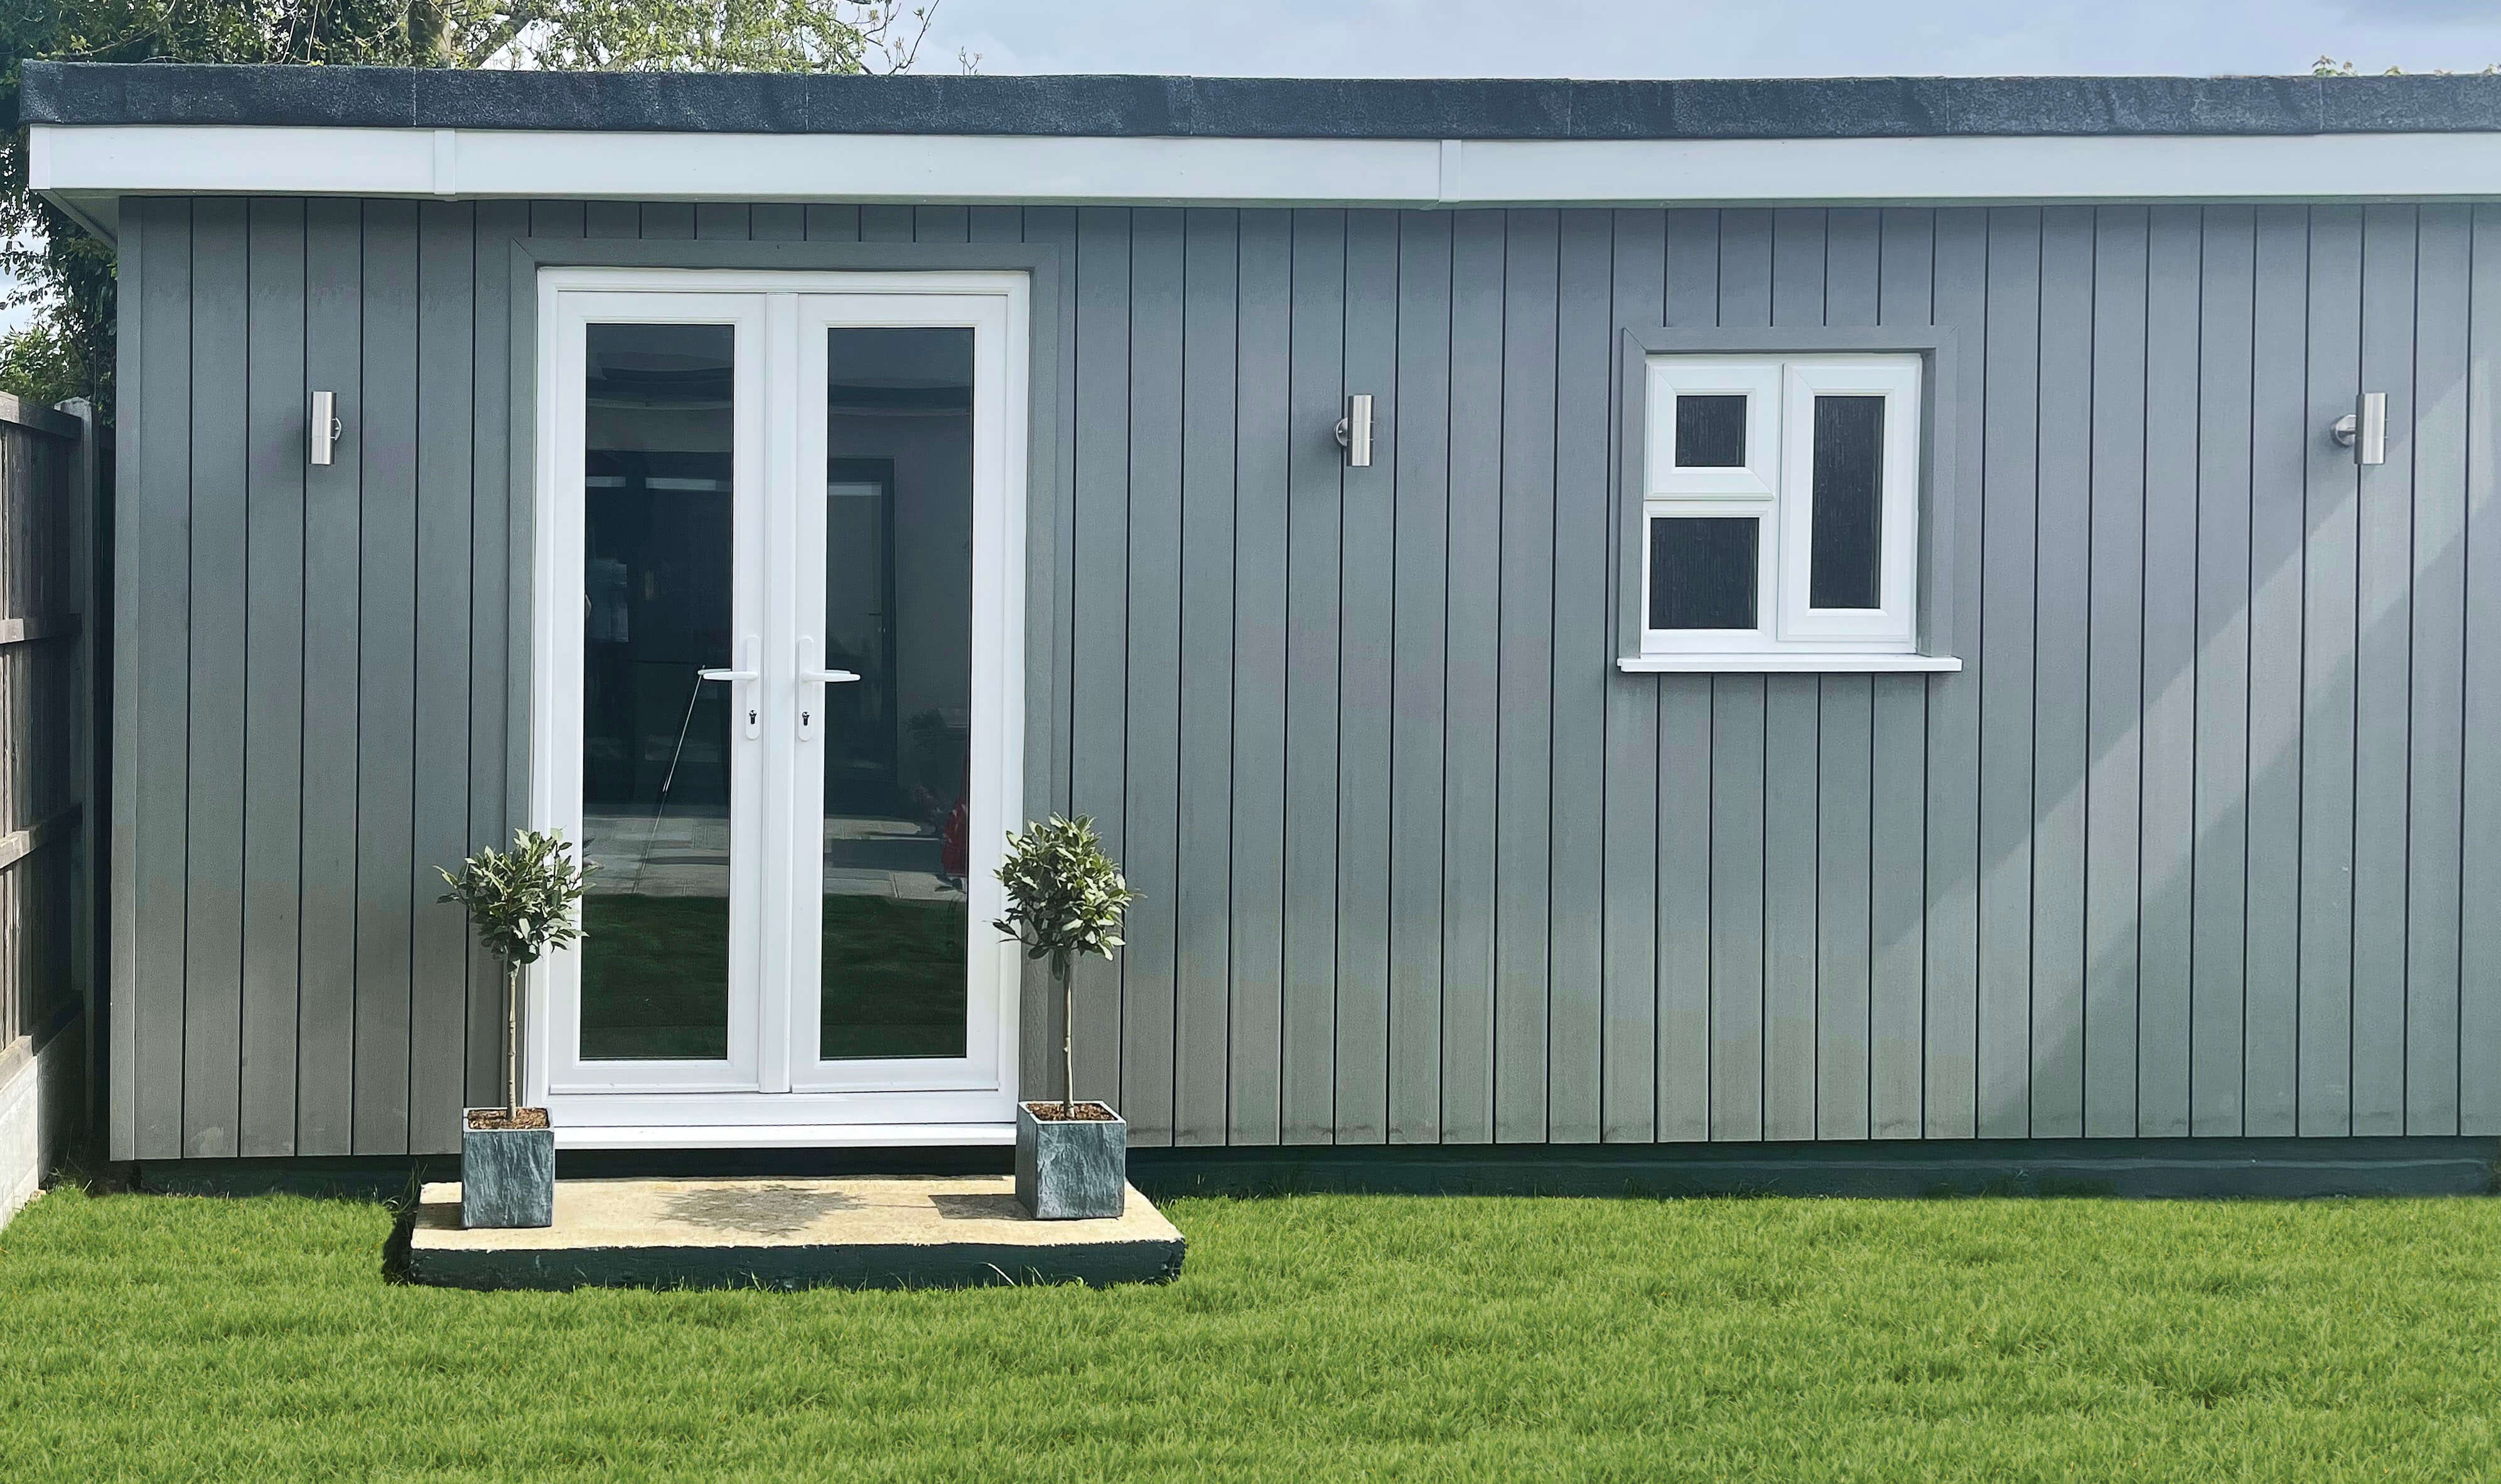 Cladco Composite Cladding provides an appealing exterior to this garden room